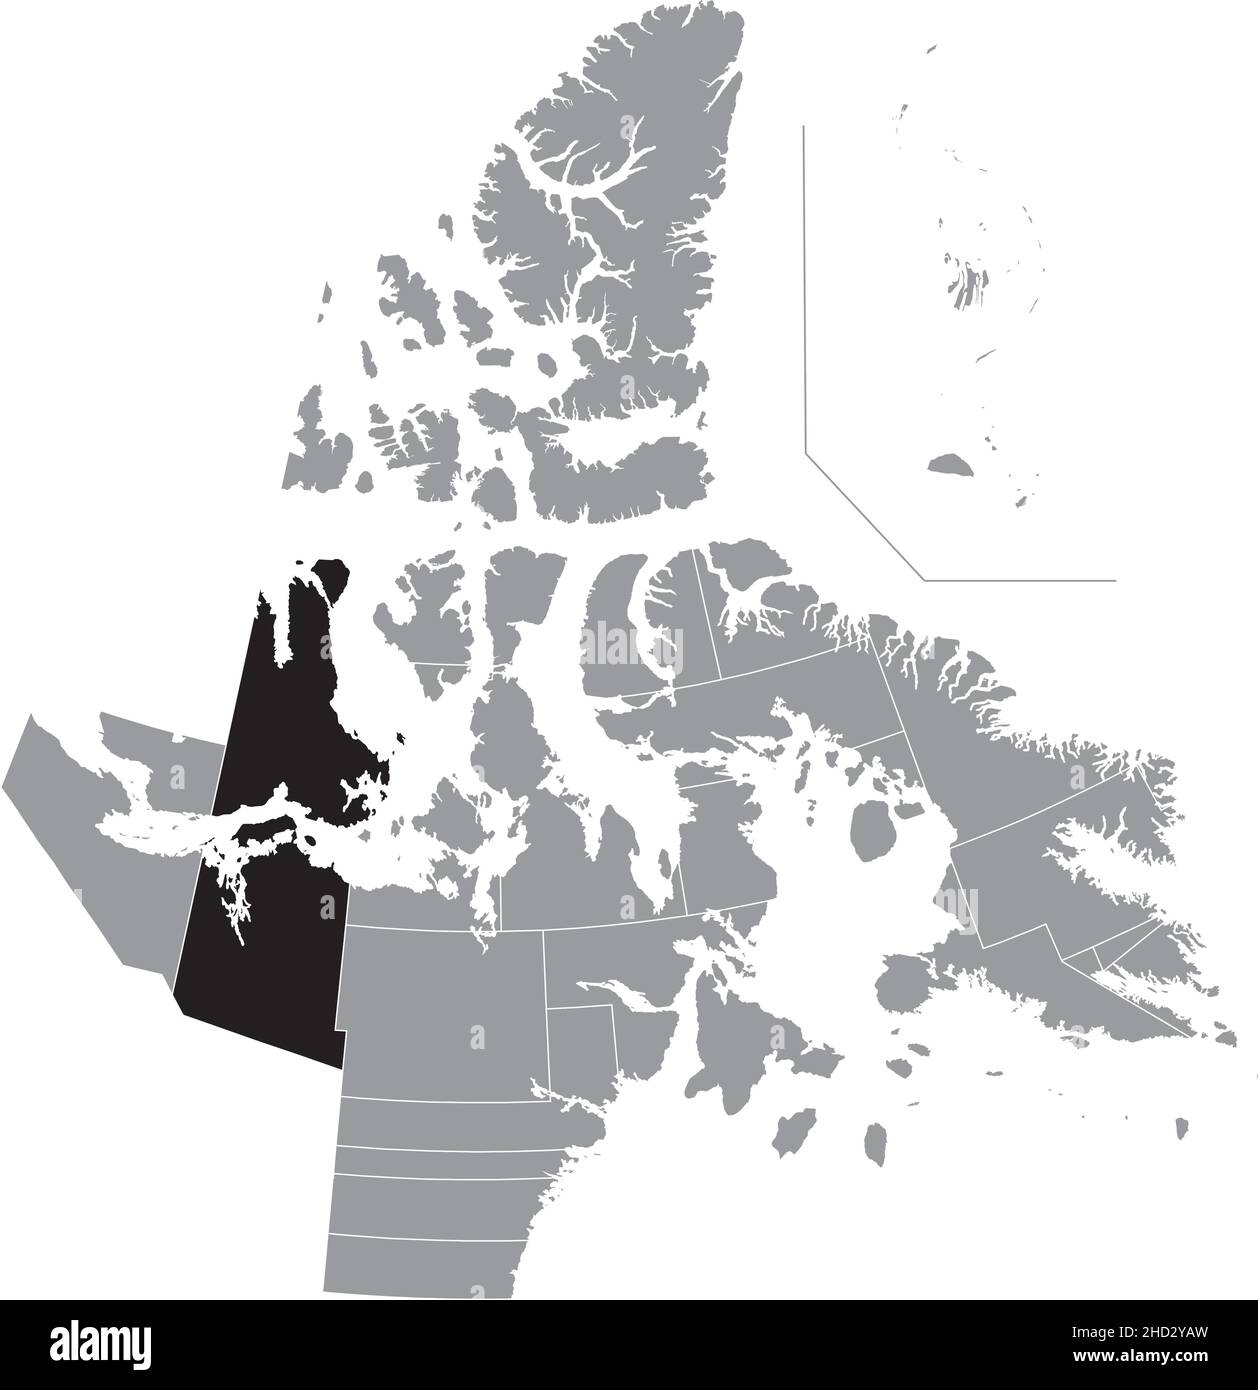 Black flat blank highlighted location map of the CAMBRIDGE BAY District inside gray administrative map of the territorial electoral districts of Canad Stock Vector